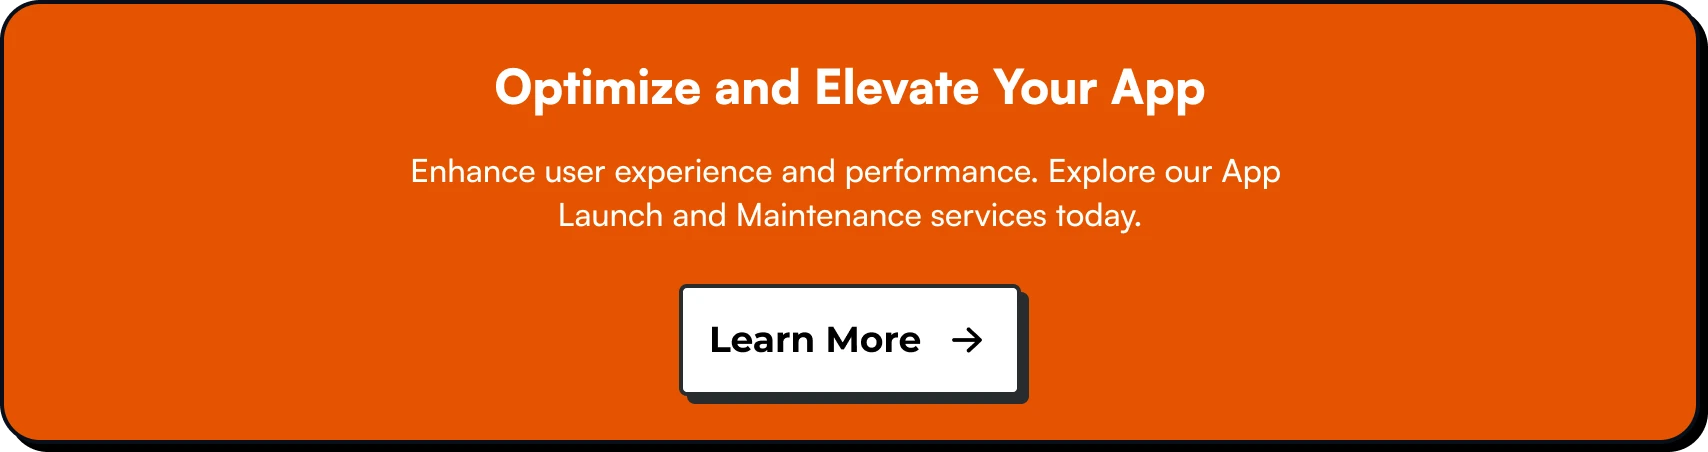 Optimize and Elevate Your App. Enhance user experience and performance. Explore our App Launch and Maintenance services today.